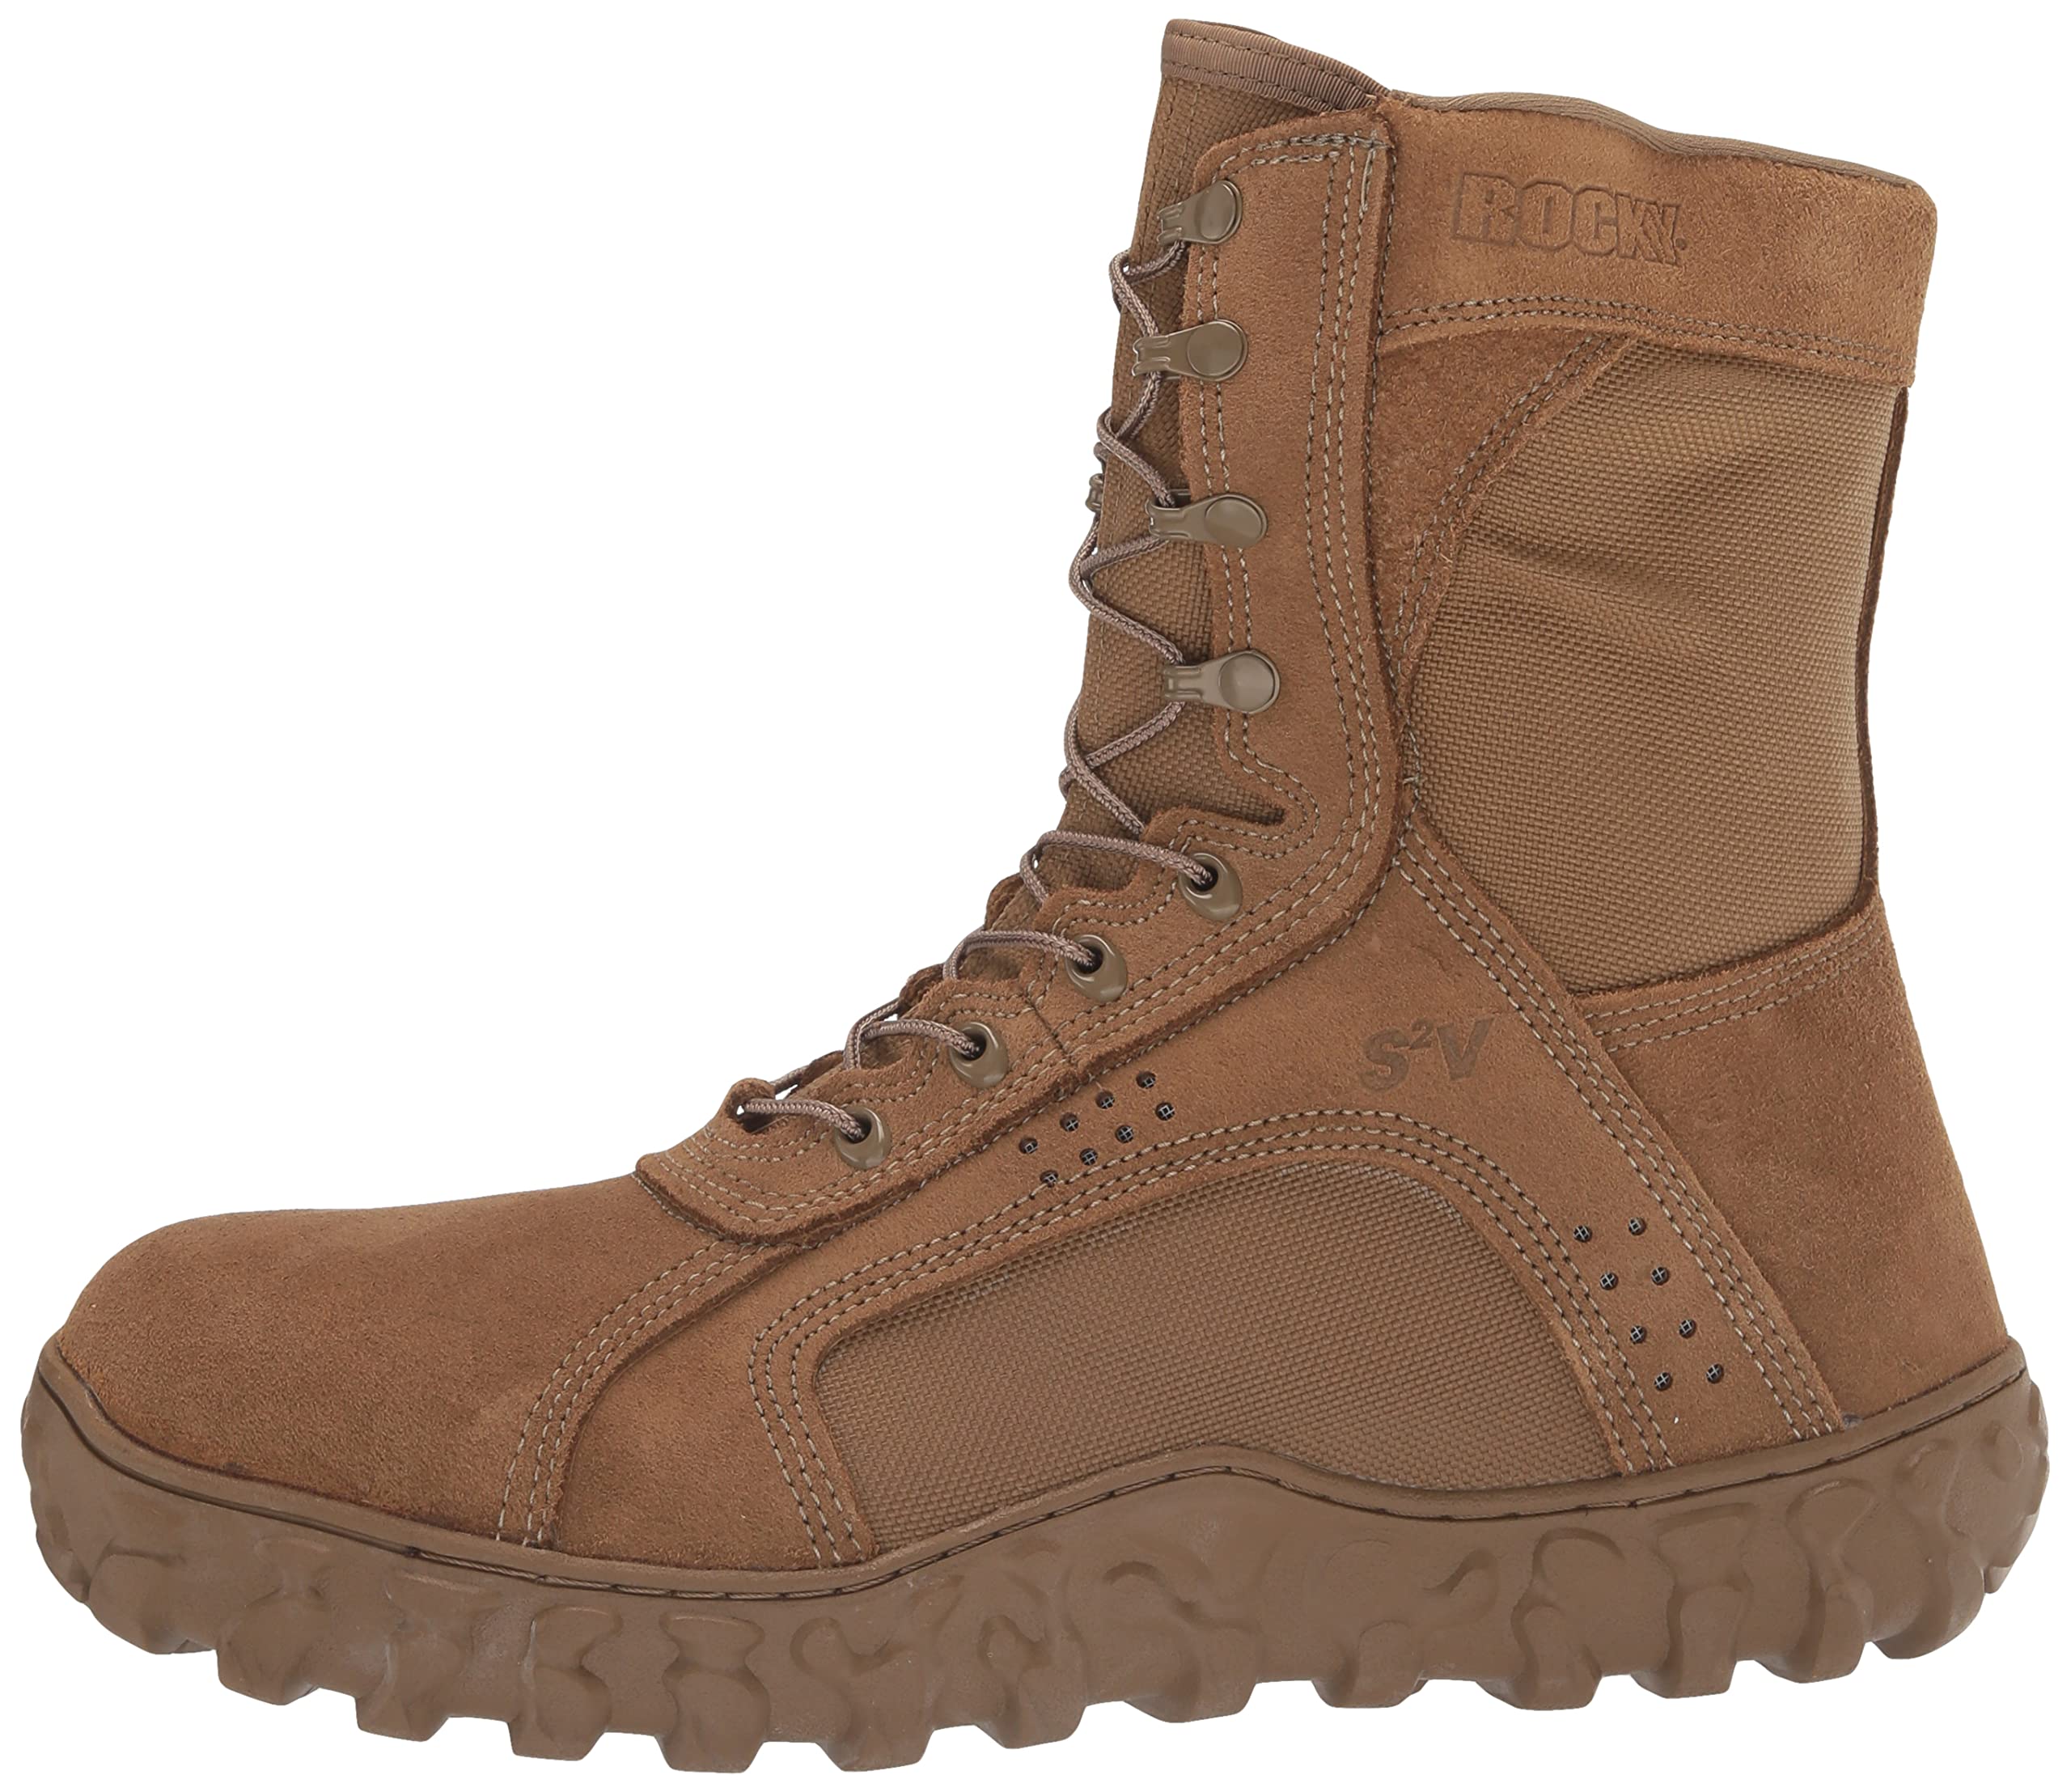 ROCKY S2V Tactical Military Boot